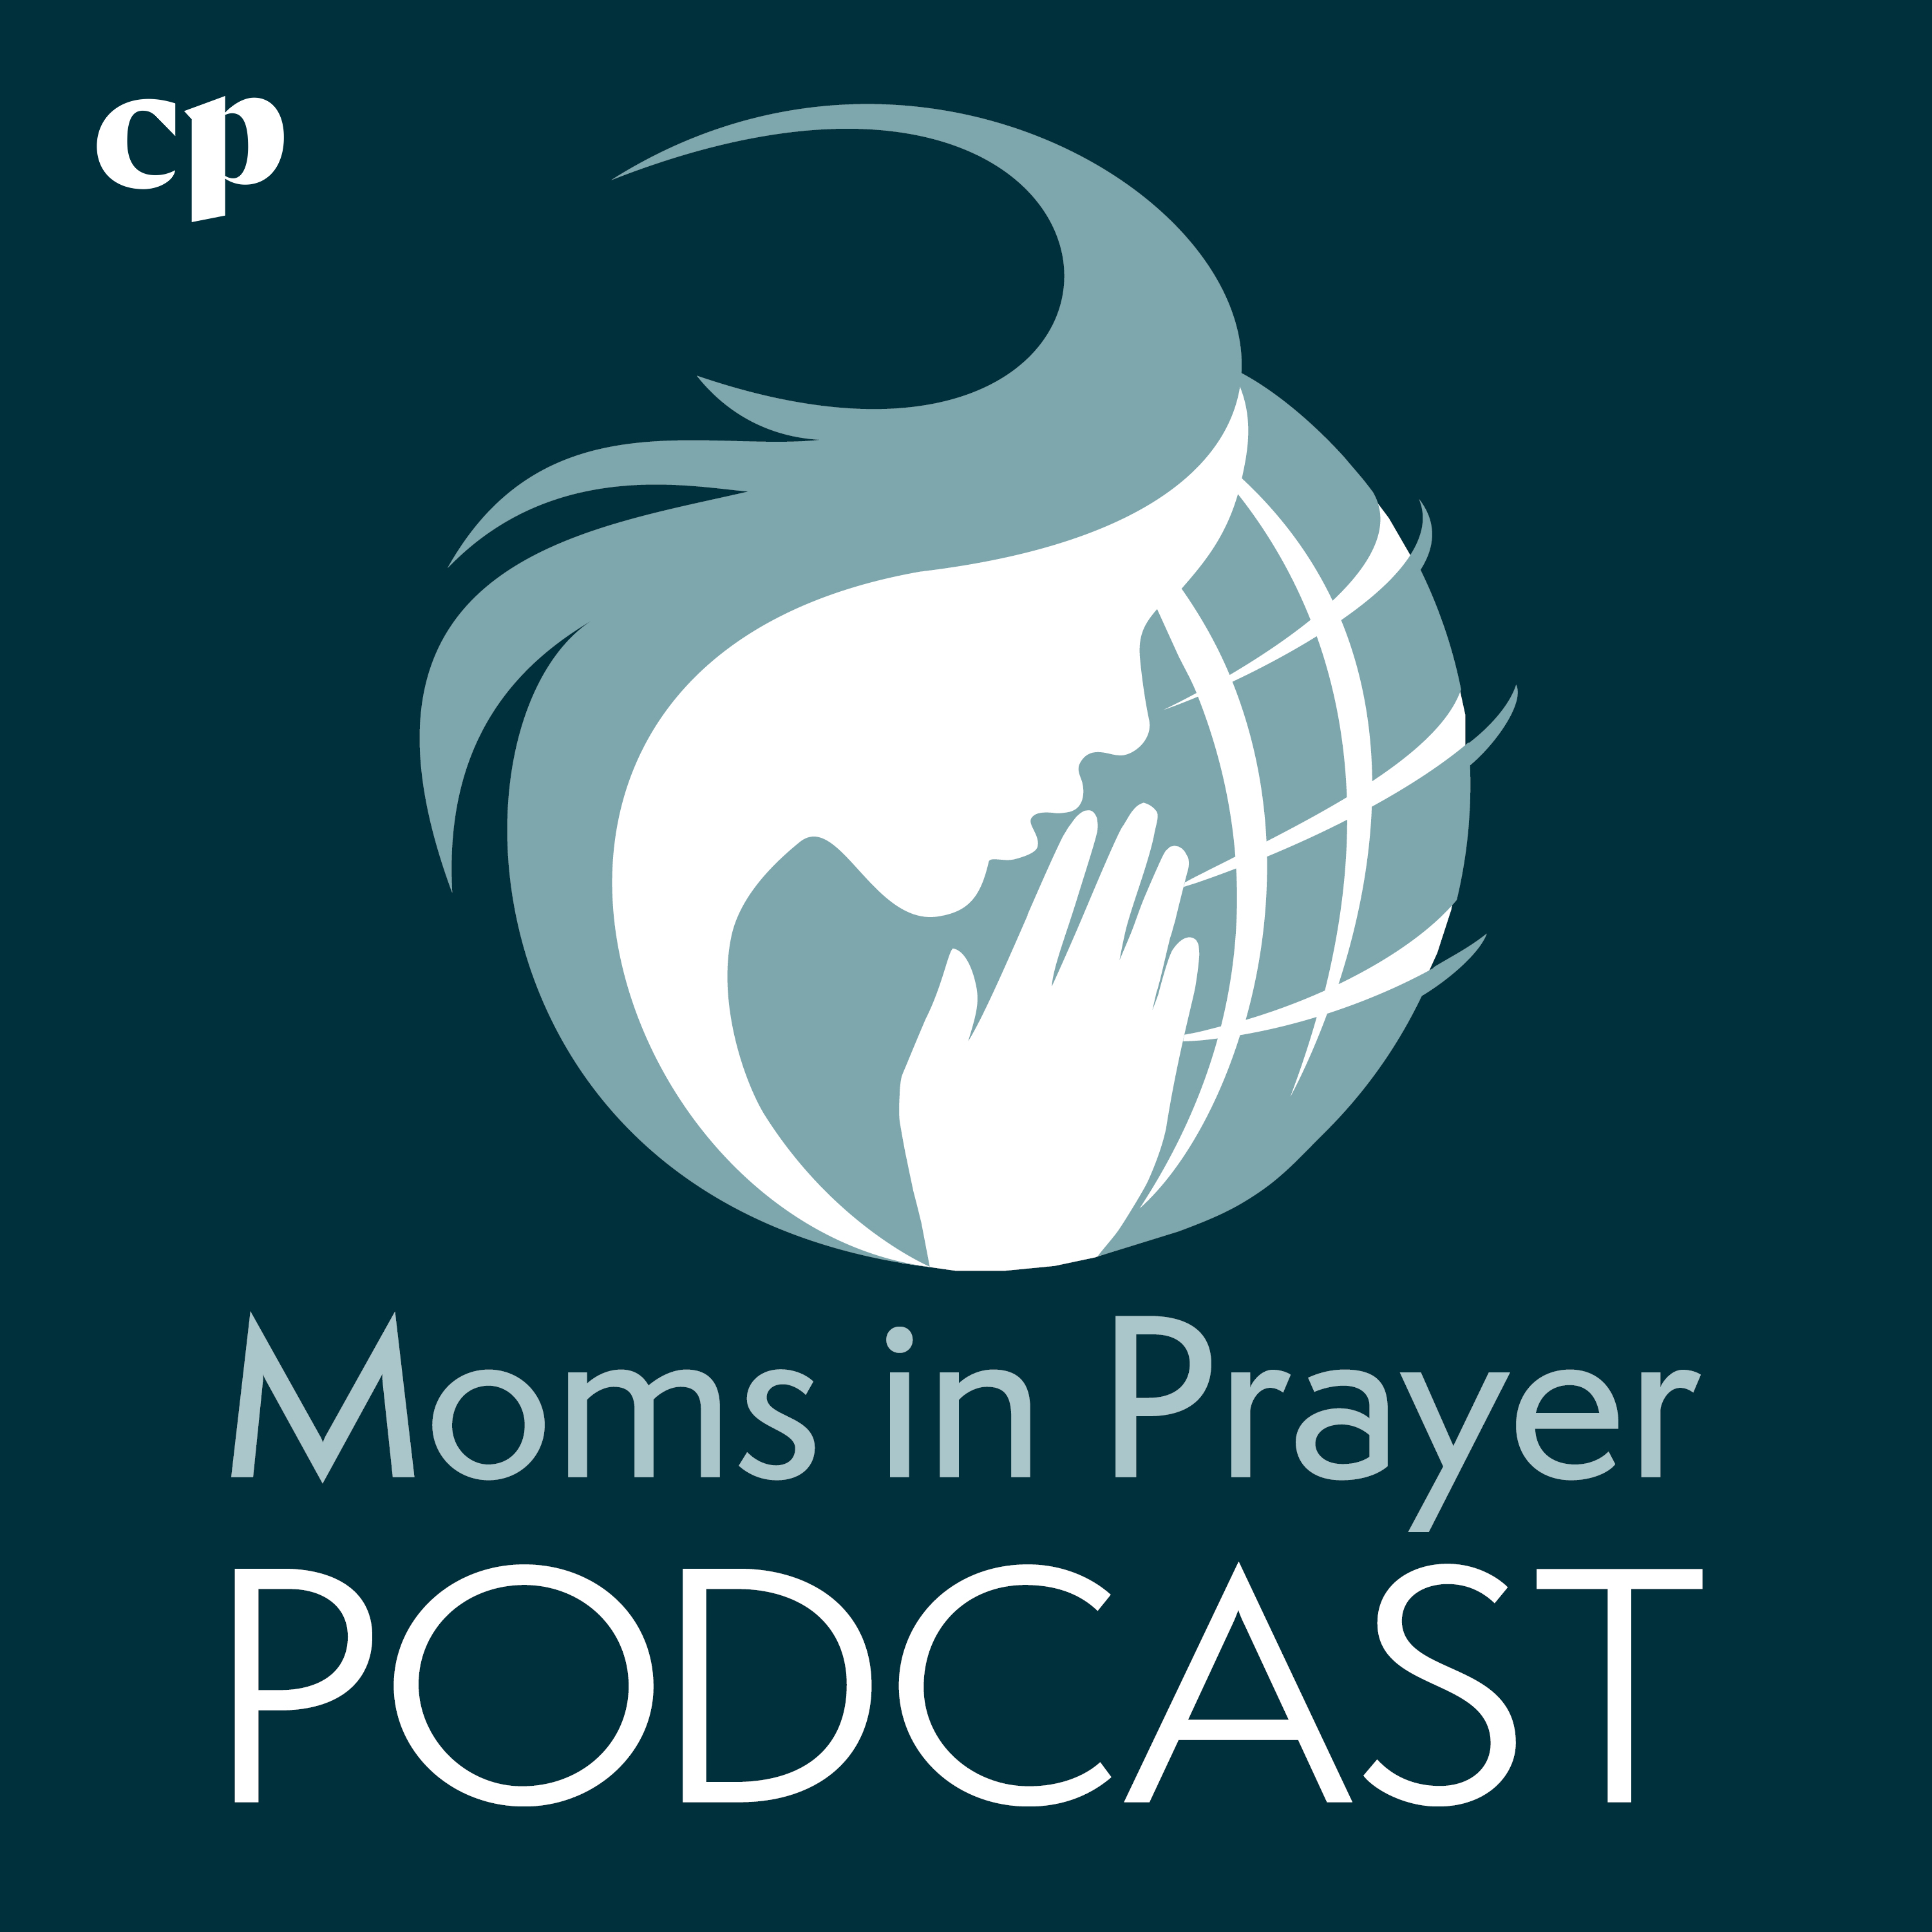 Episode 217 - Blessing Our Schools With Prayer with David Schmus & Olivia Williamson